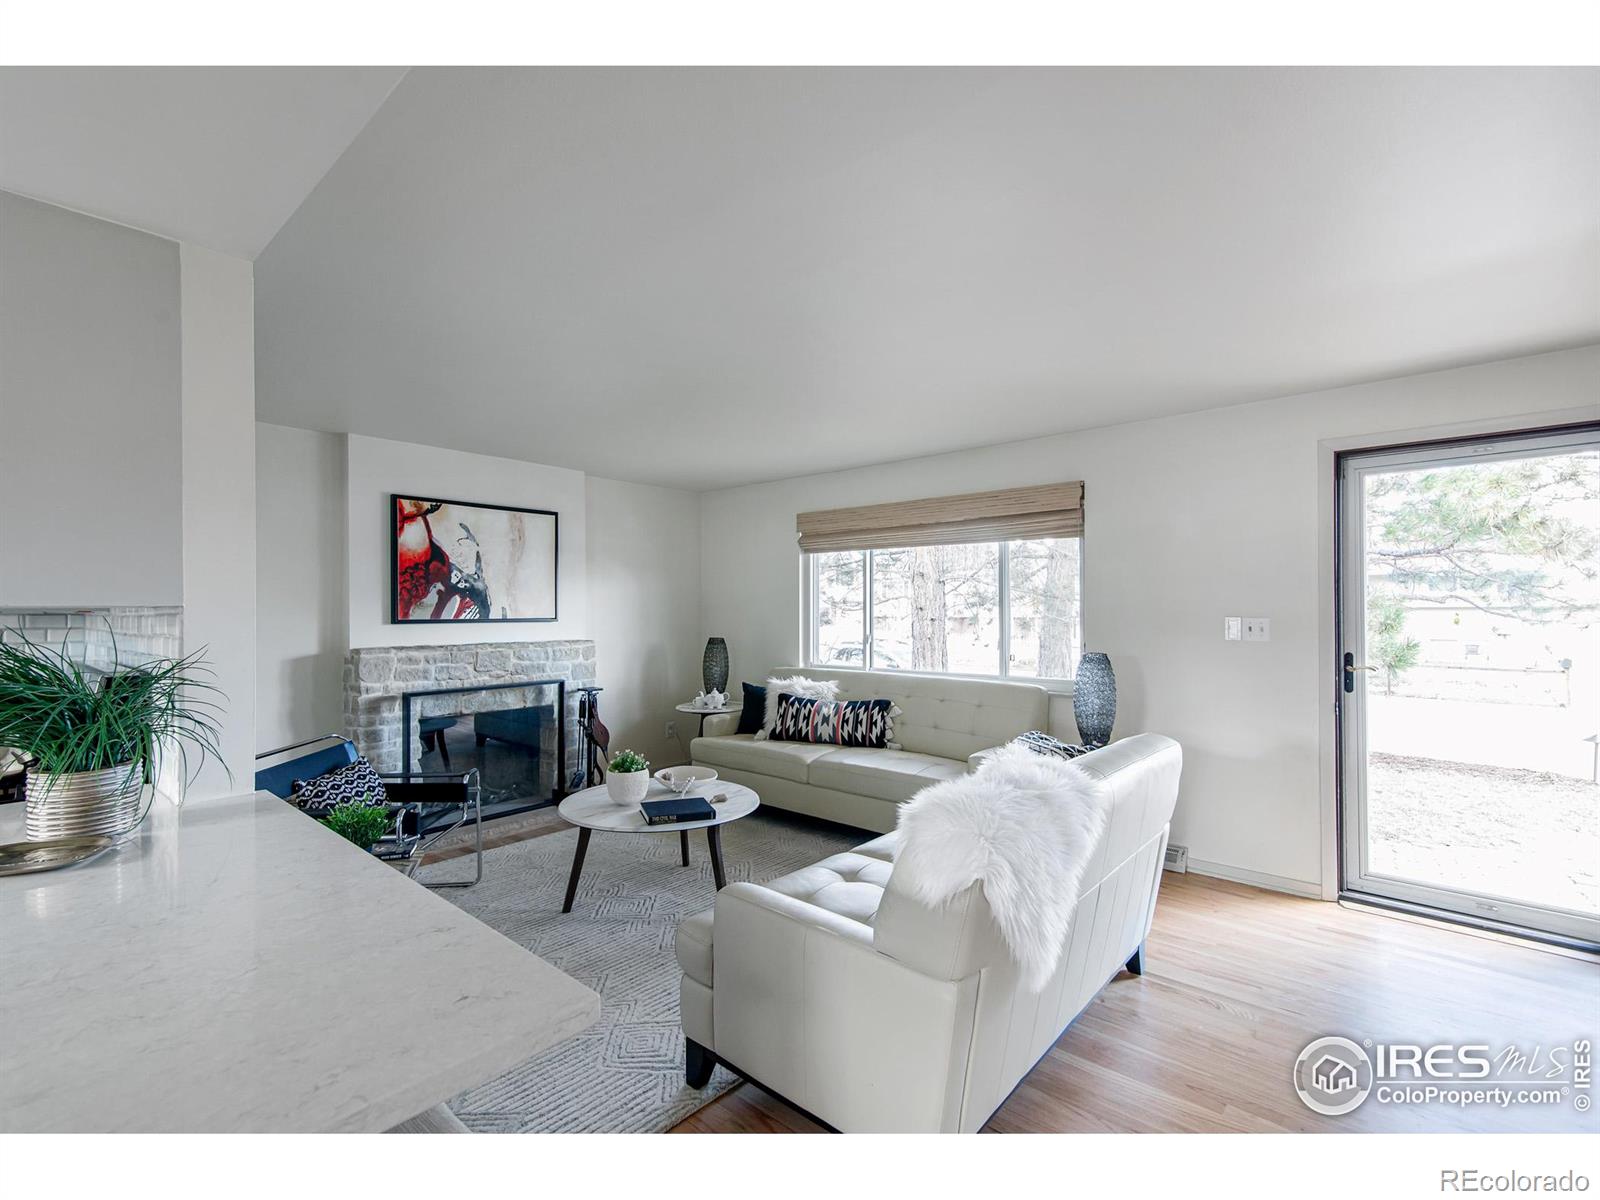 Report Image for 4480  Grinnell Avenue,Boulder, Colorado